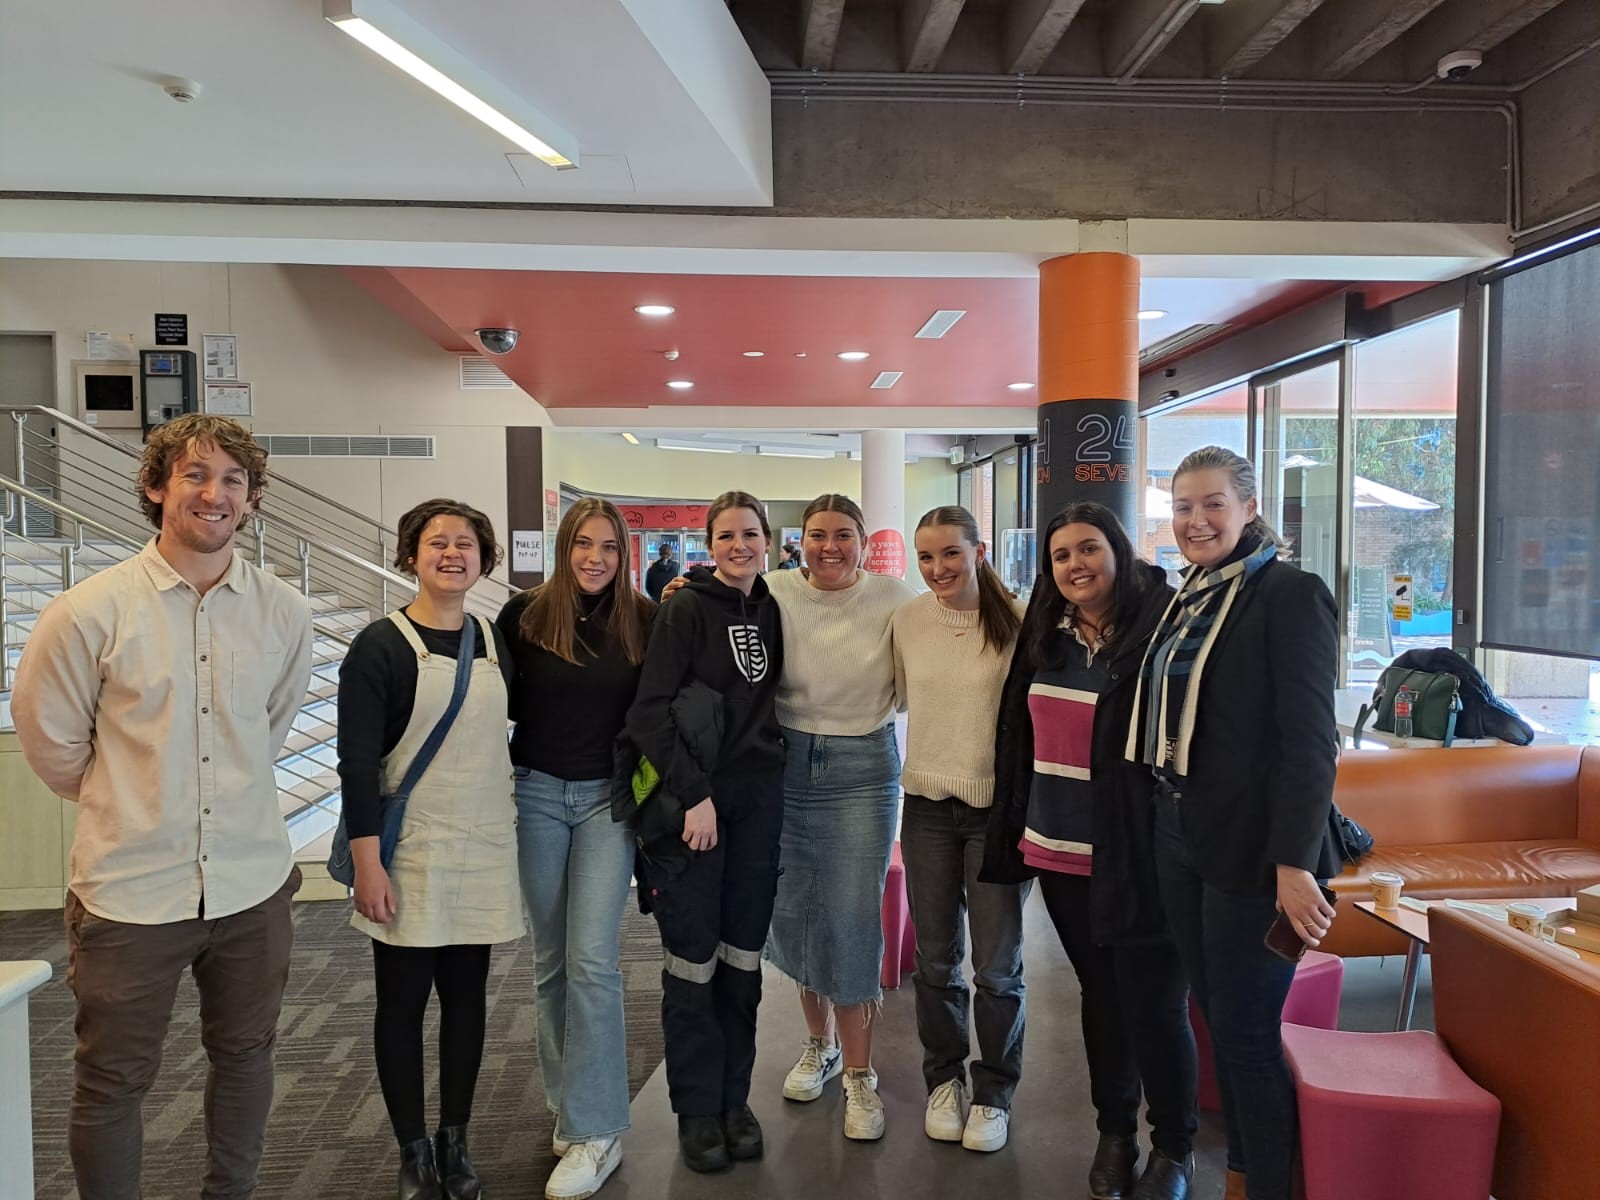 Three Rivers Pathways Co-Ordinator, Andrew O’Brien. left, with Country Education Foundation of Australia Partnerships Manager, Hilary Matchett, right, and a group of CEF-supported students studying health at Charles Sturt University, at its Bathurst campus.